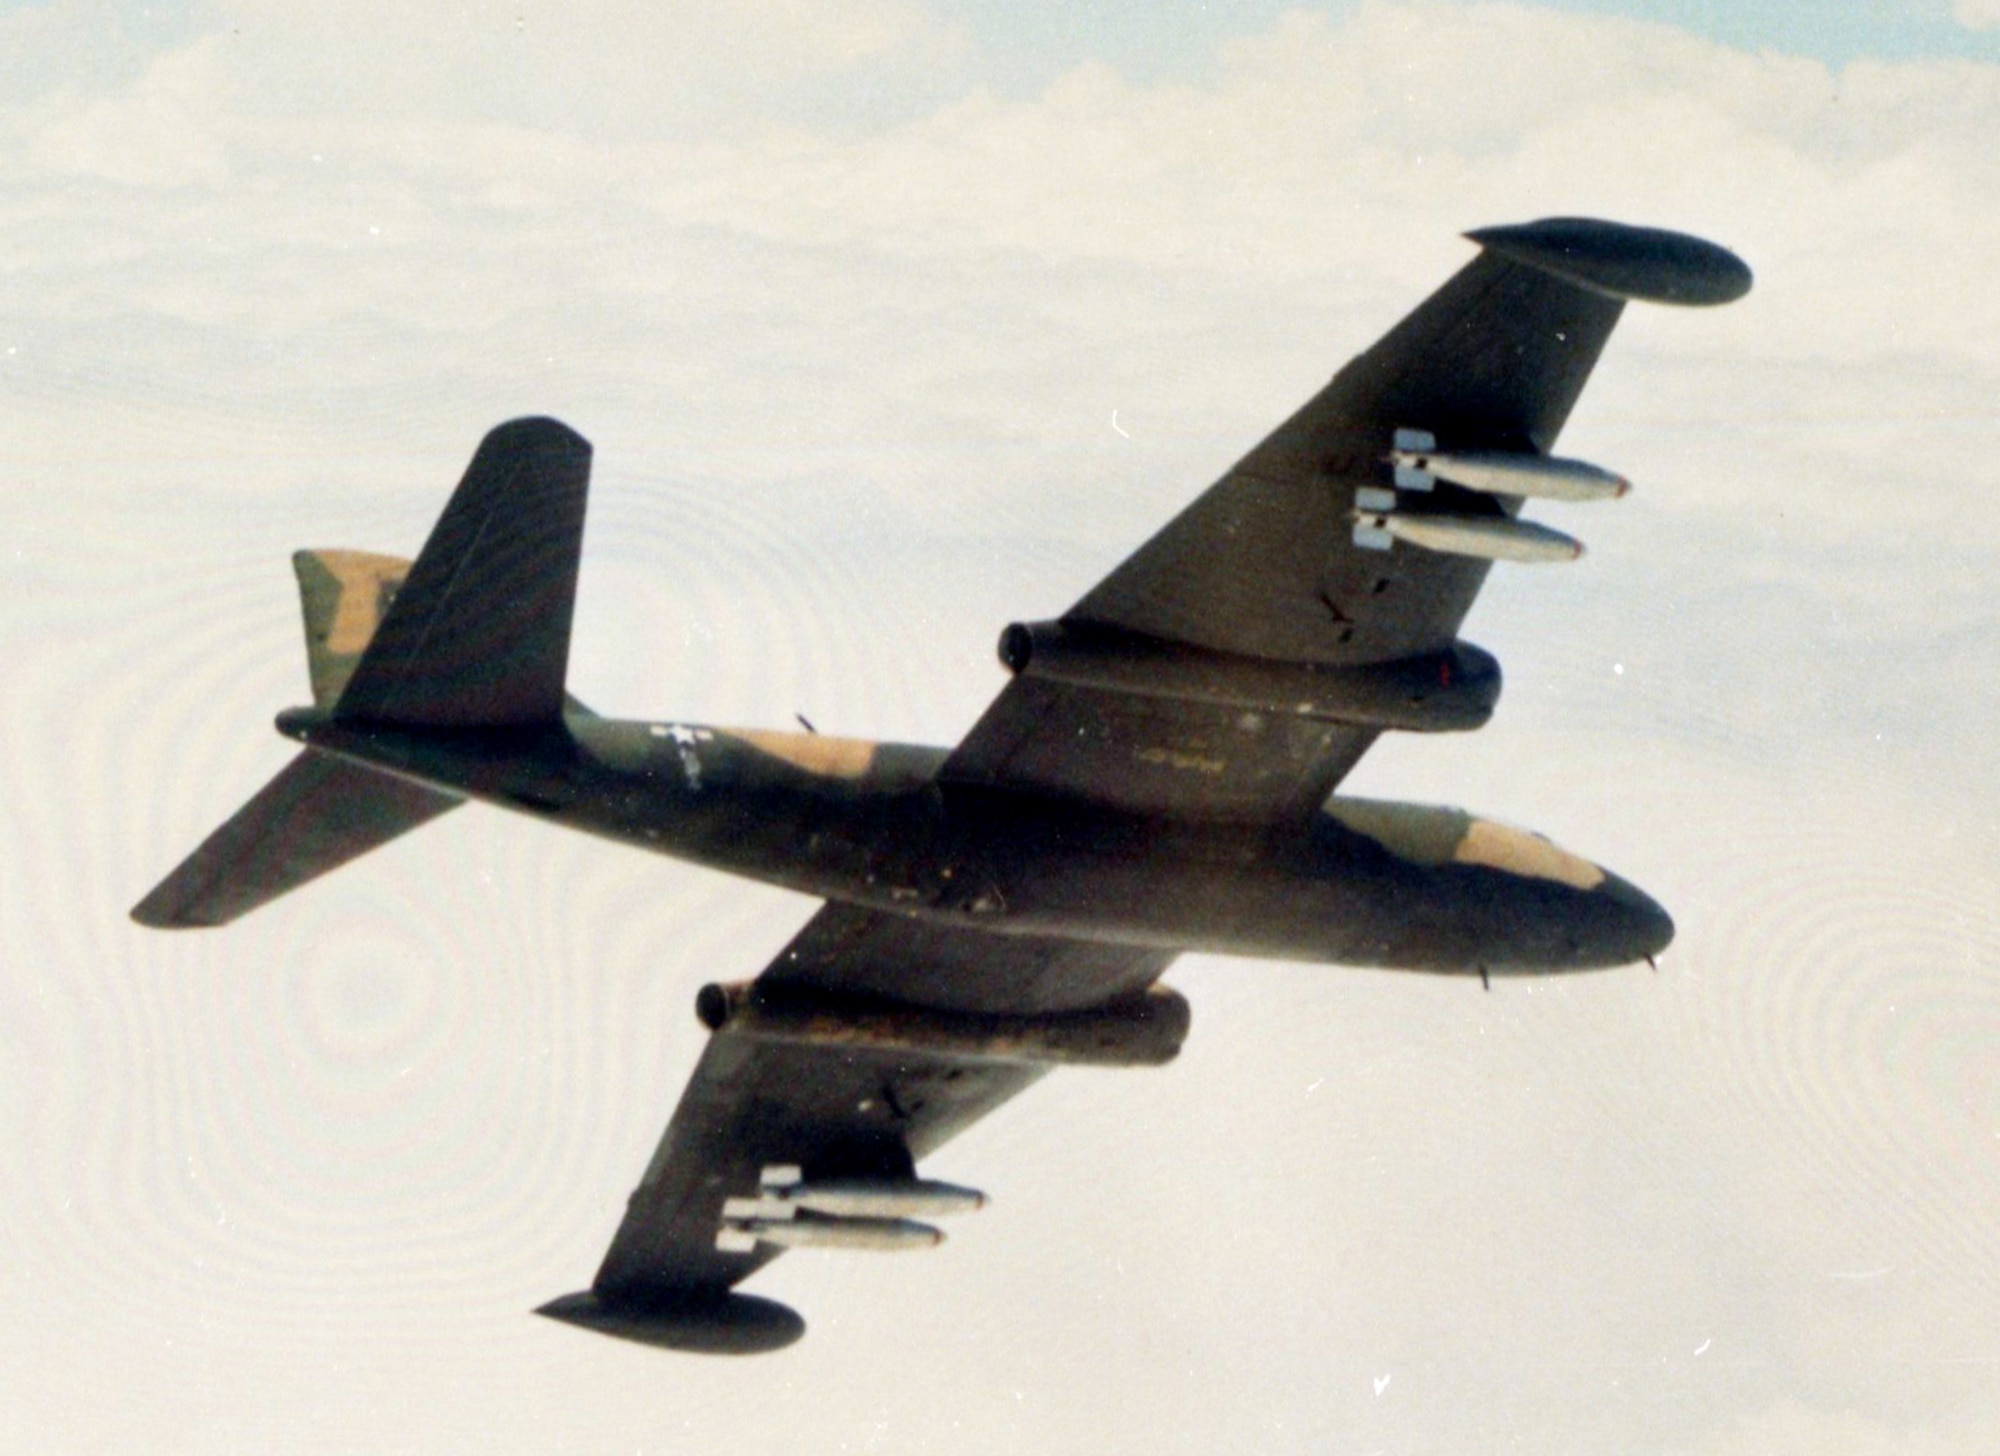 A B-57 of the 8th Tactical Bomb Squadron loaded with two 750-pound napalm canisters on each wing in 1969. In addition to carrying a larger bomb load, the jet-powered B-57s provided quicker response time to requests for close air support when a delay of just a few minutes could mean disaster for the ground forces. (U.S. Air Force photo)